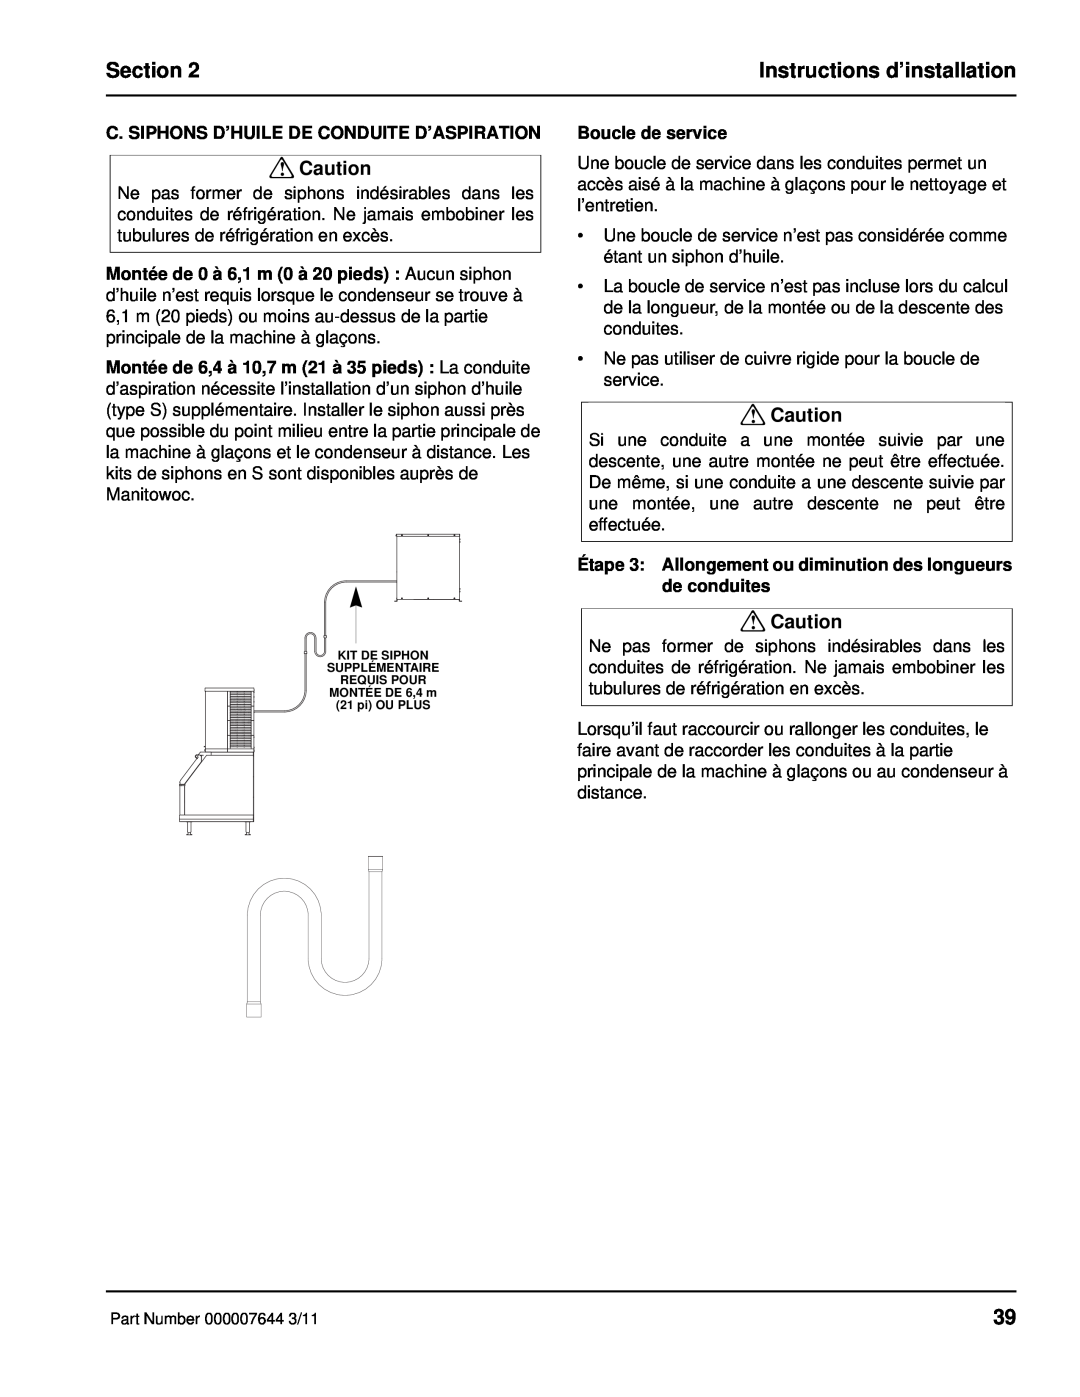 Manitowoc Ice RF manual Section, Instructions d’installation 